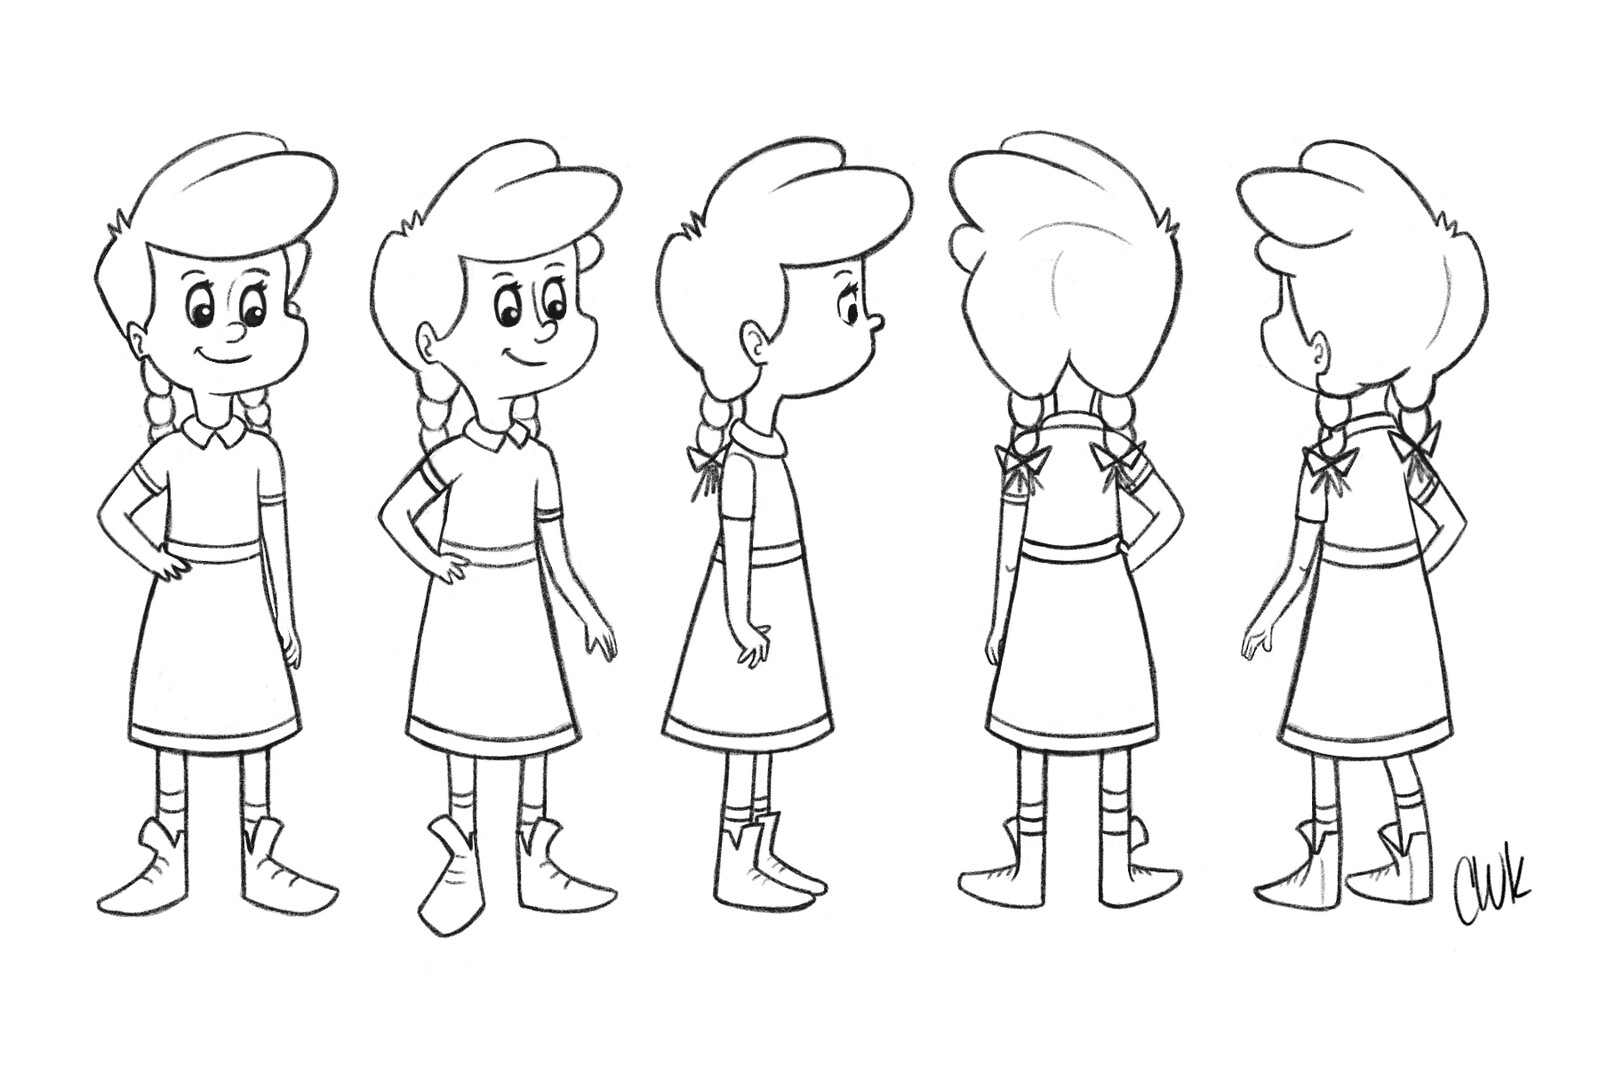 Final design. After working on the side by side, I decided to combine earlier concepts with the initial illustration.  This will facilitate the animation pipeline and still convey Thea's personality.